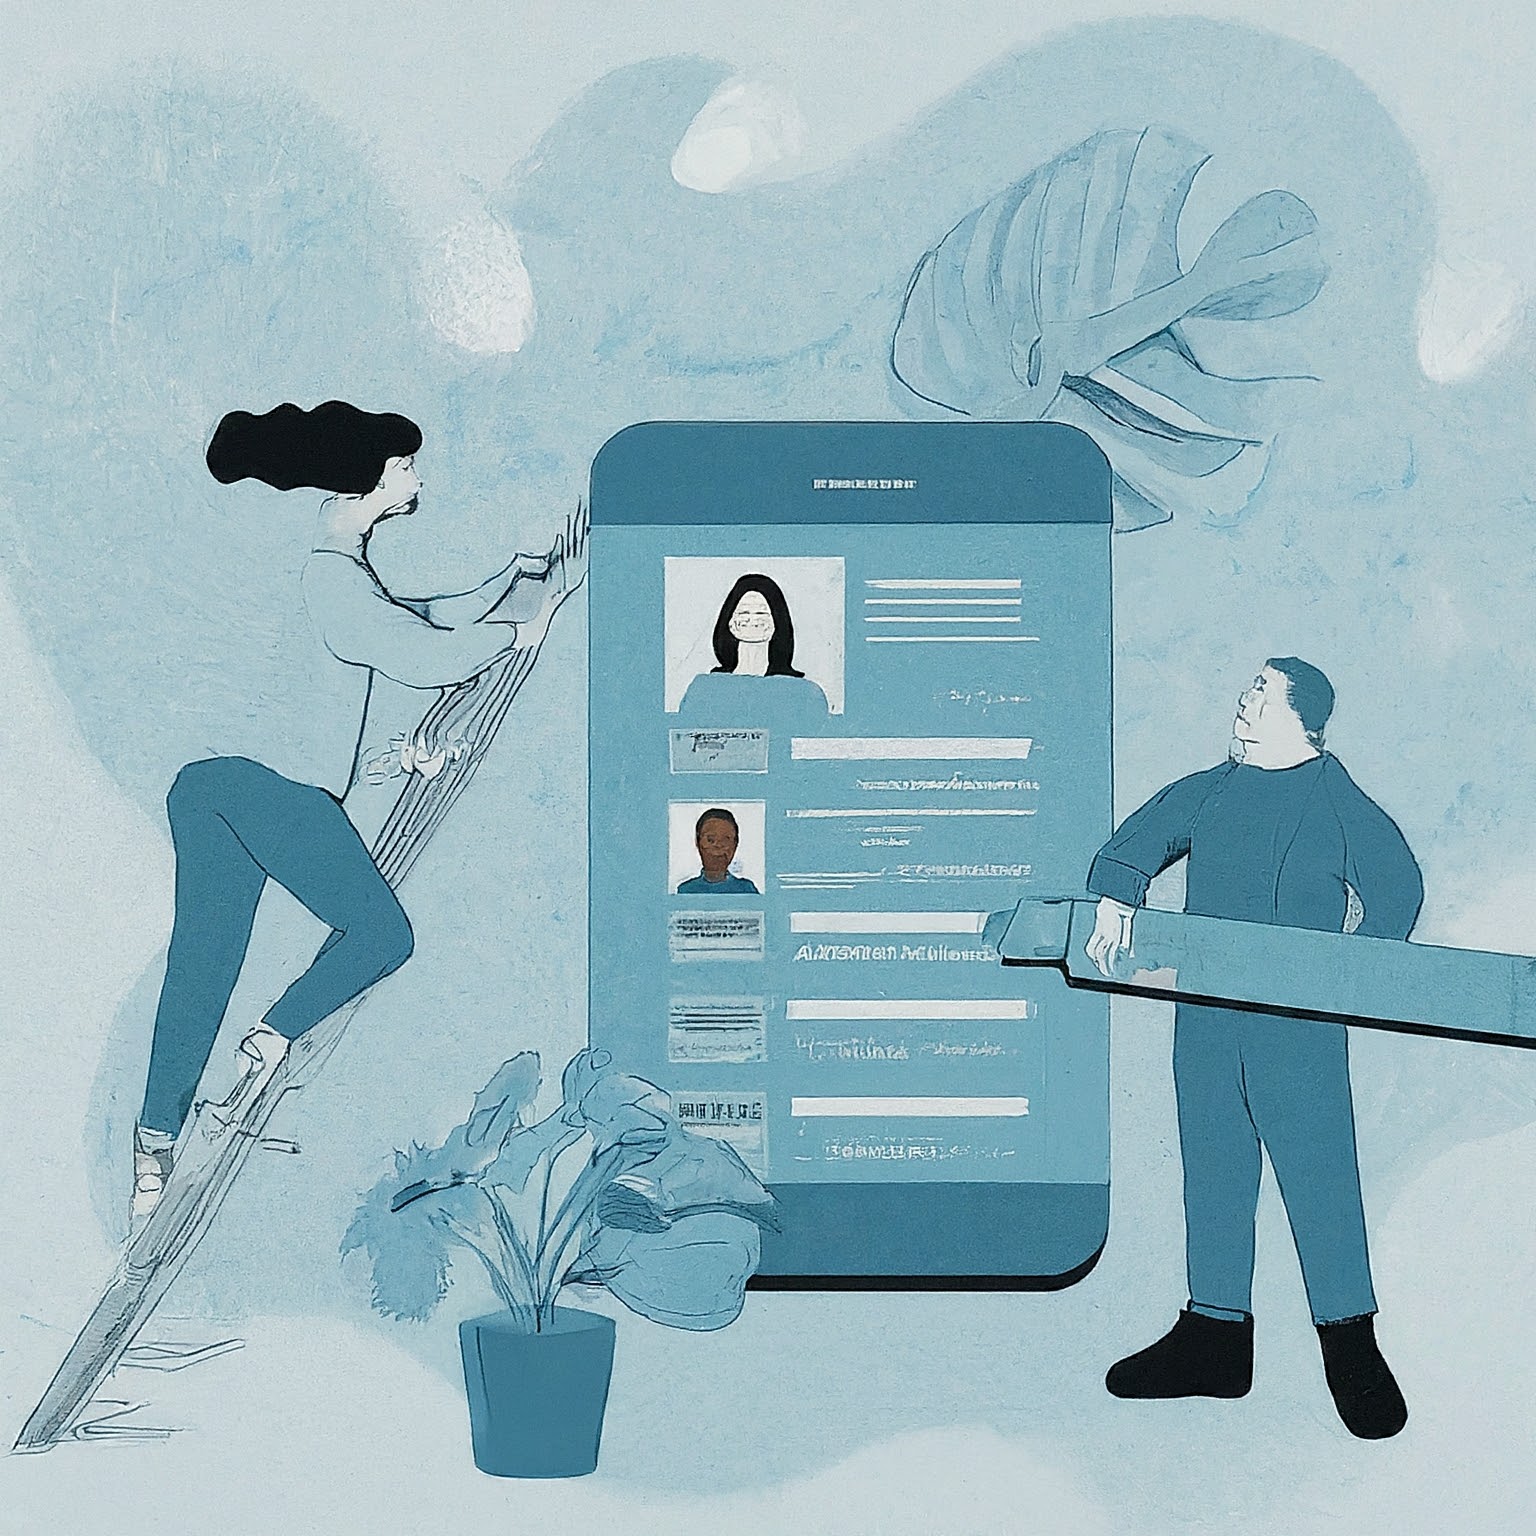 Banner Image showing an illustration about resume's